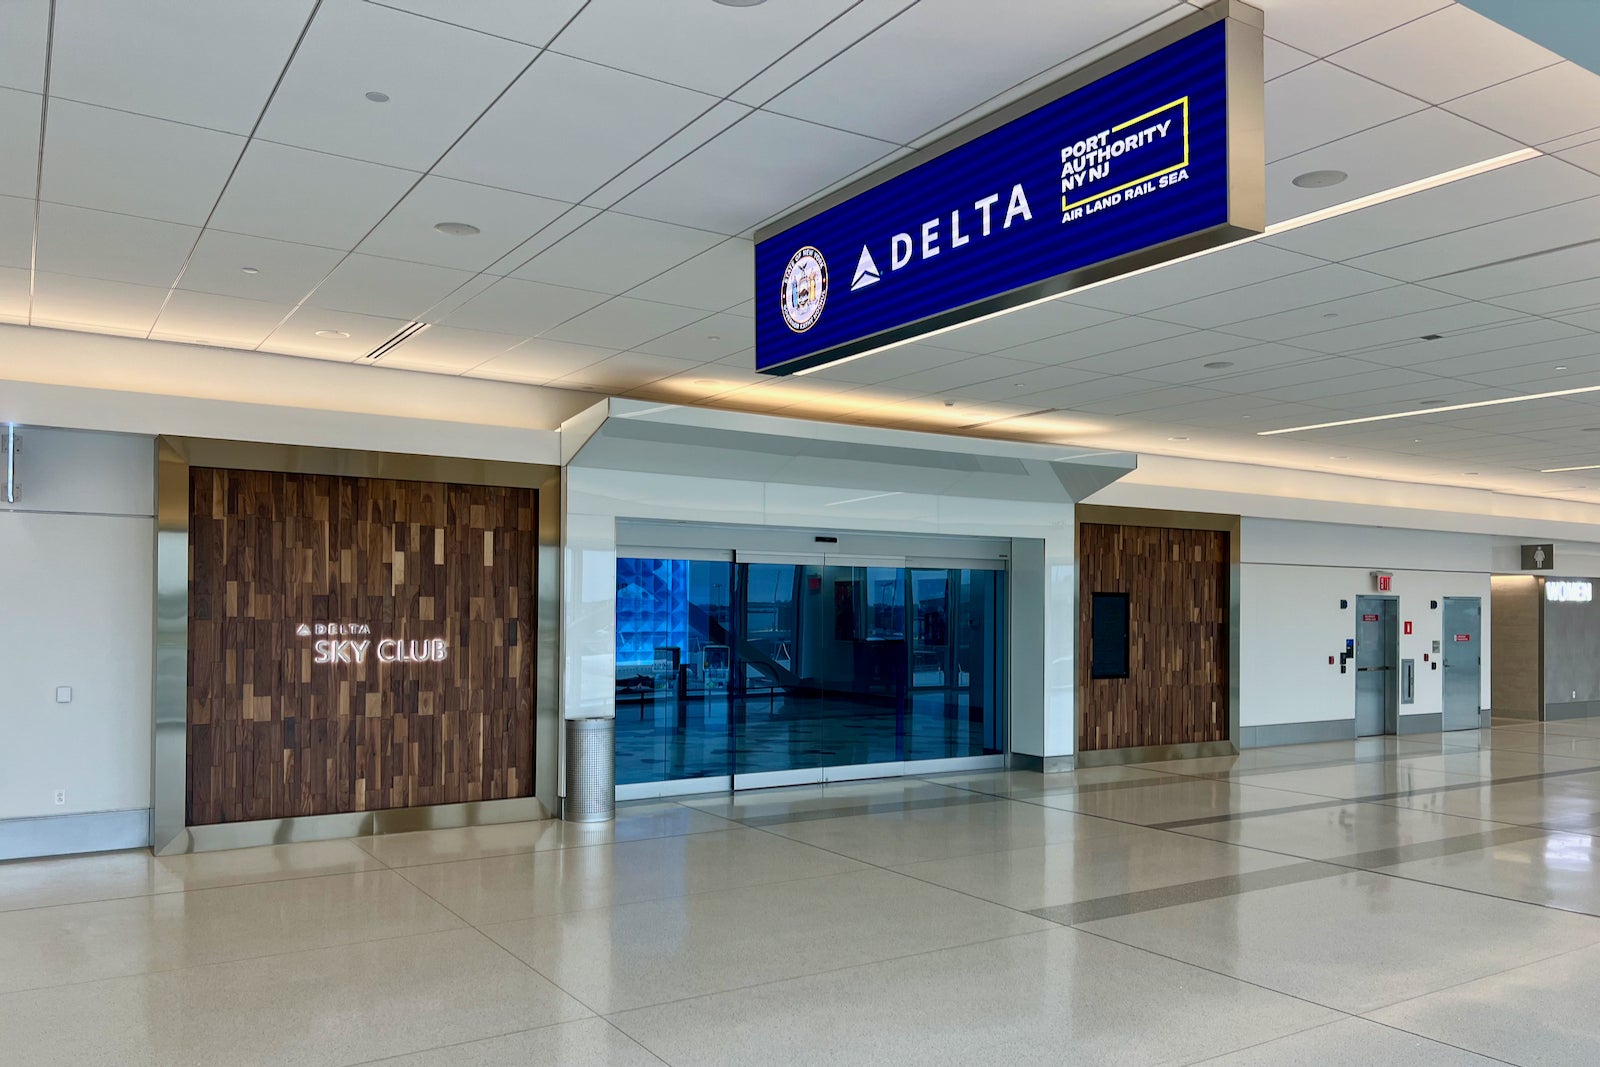 Delta overhauls Sky Club access policy, makes big cuts to reduce  overcrowding - The Points Guy